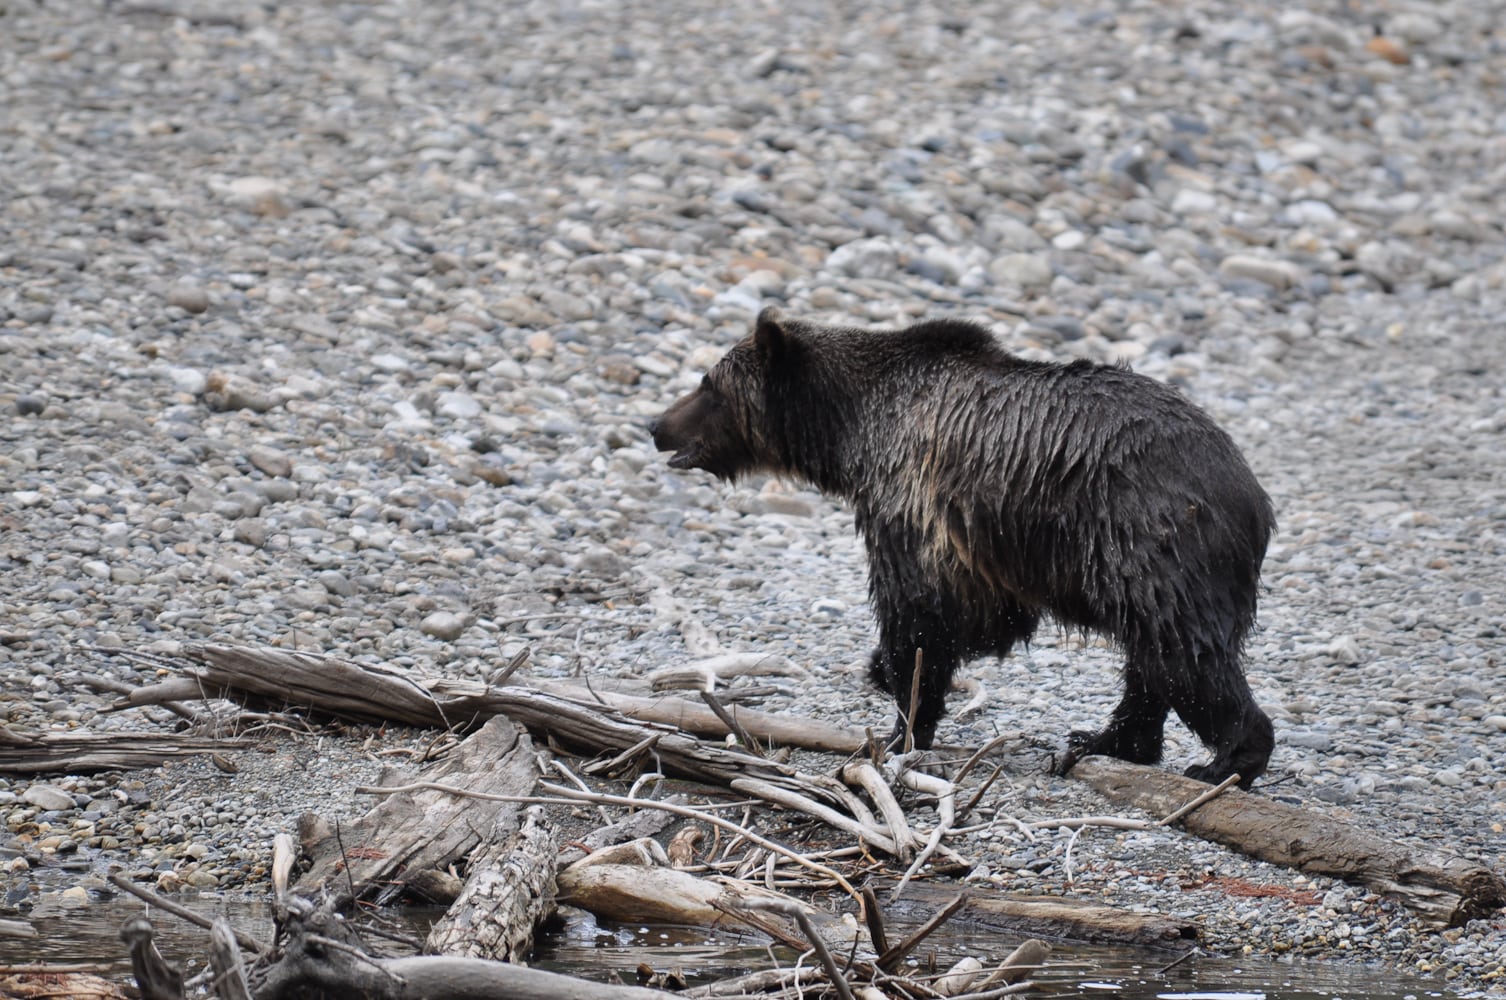 A young grizzly bear at Wild Bear Lodge